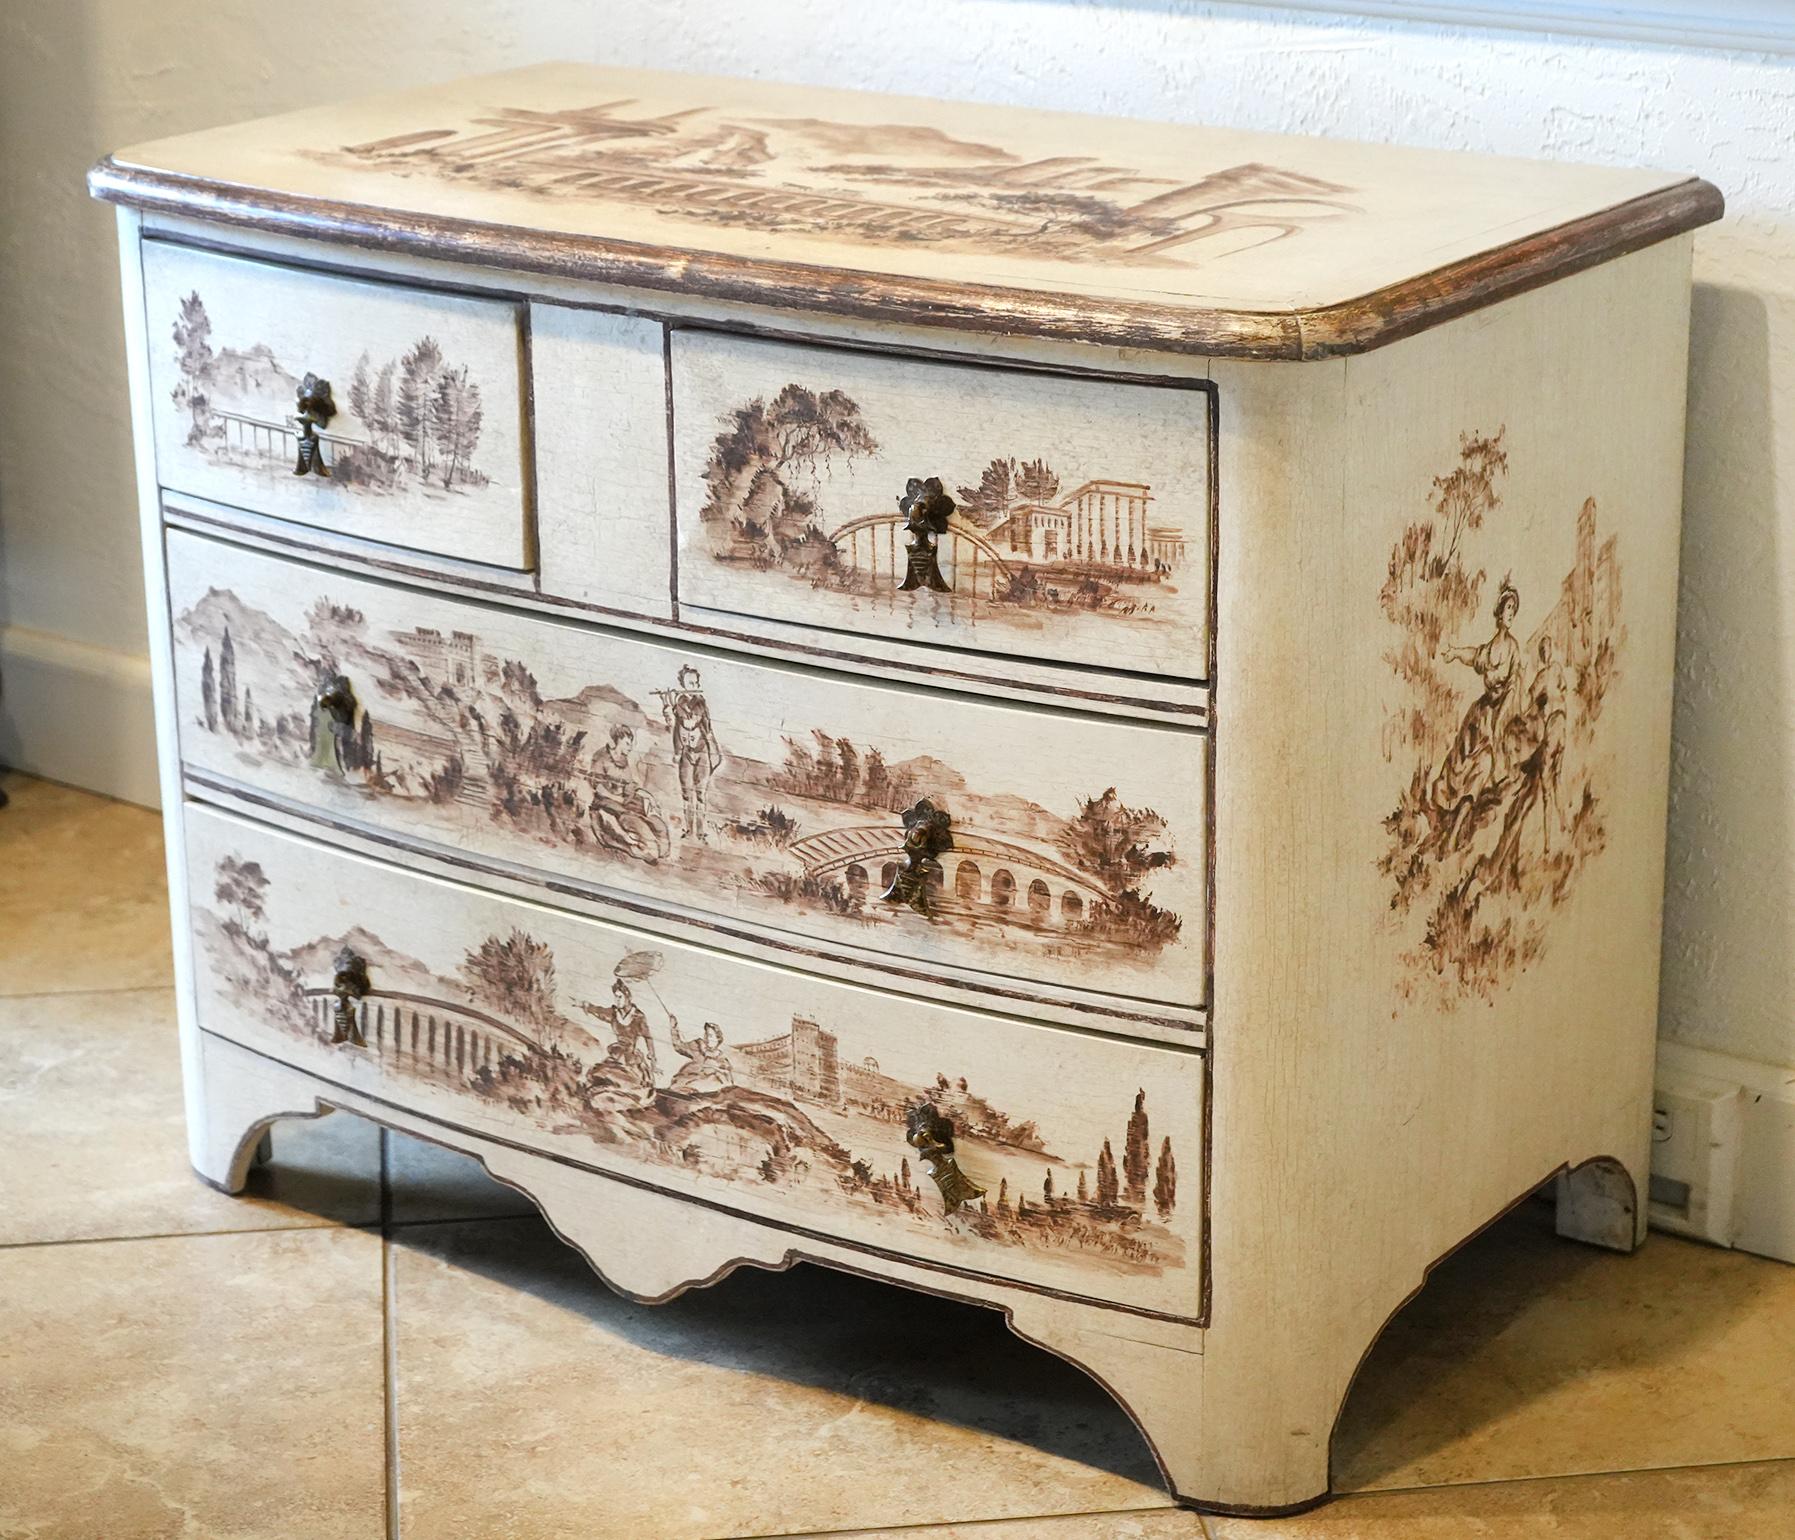 Of great shape with convex front and rounded corners this cream colored commode features hand painted landscapes with bridges, ruins, buildings and people on the top, the front and both sides. Bridges are the main theme in all the landscapes while